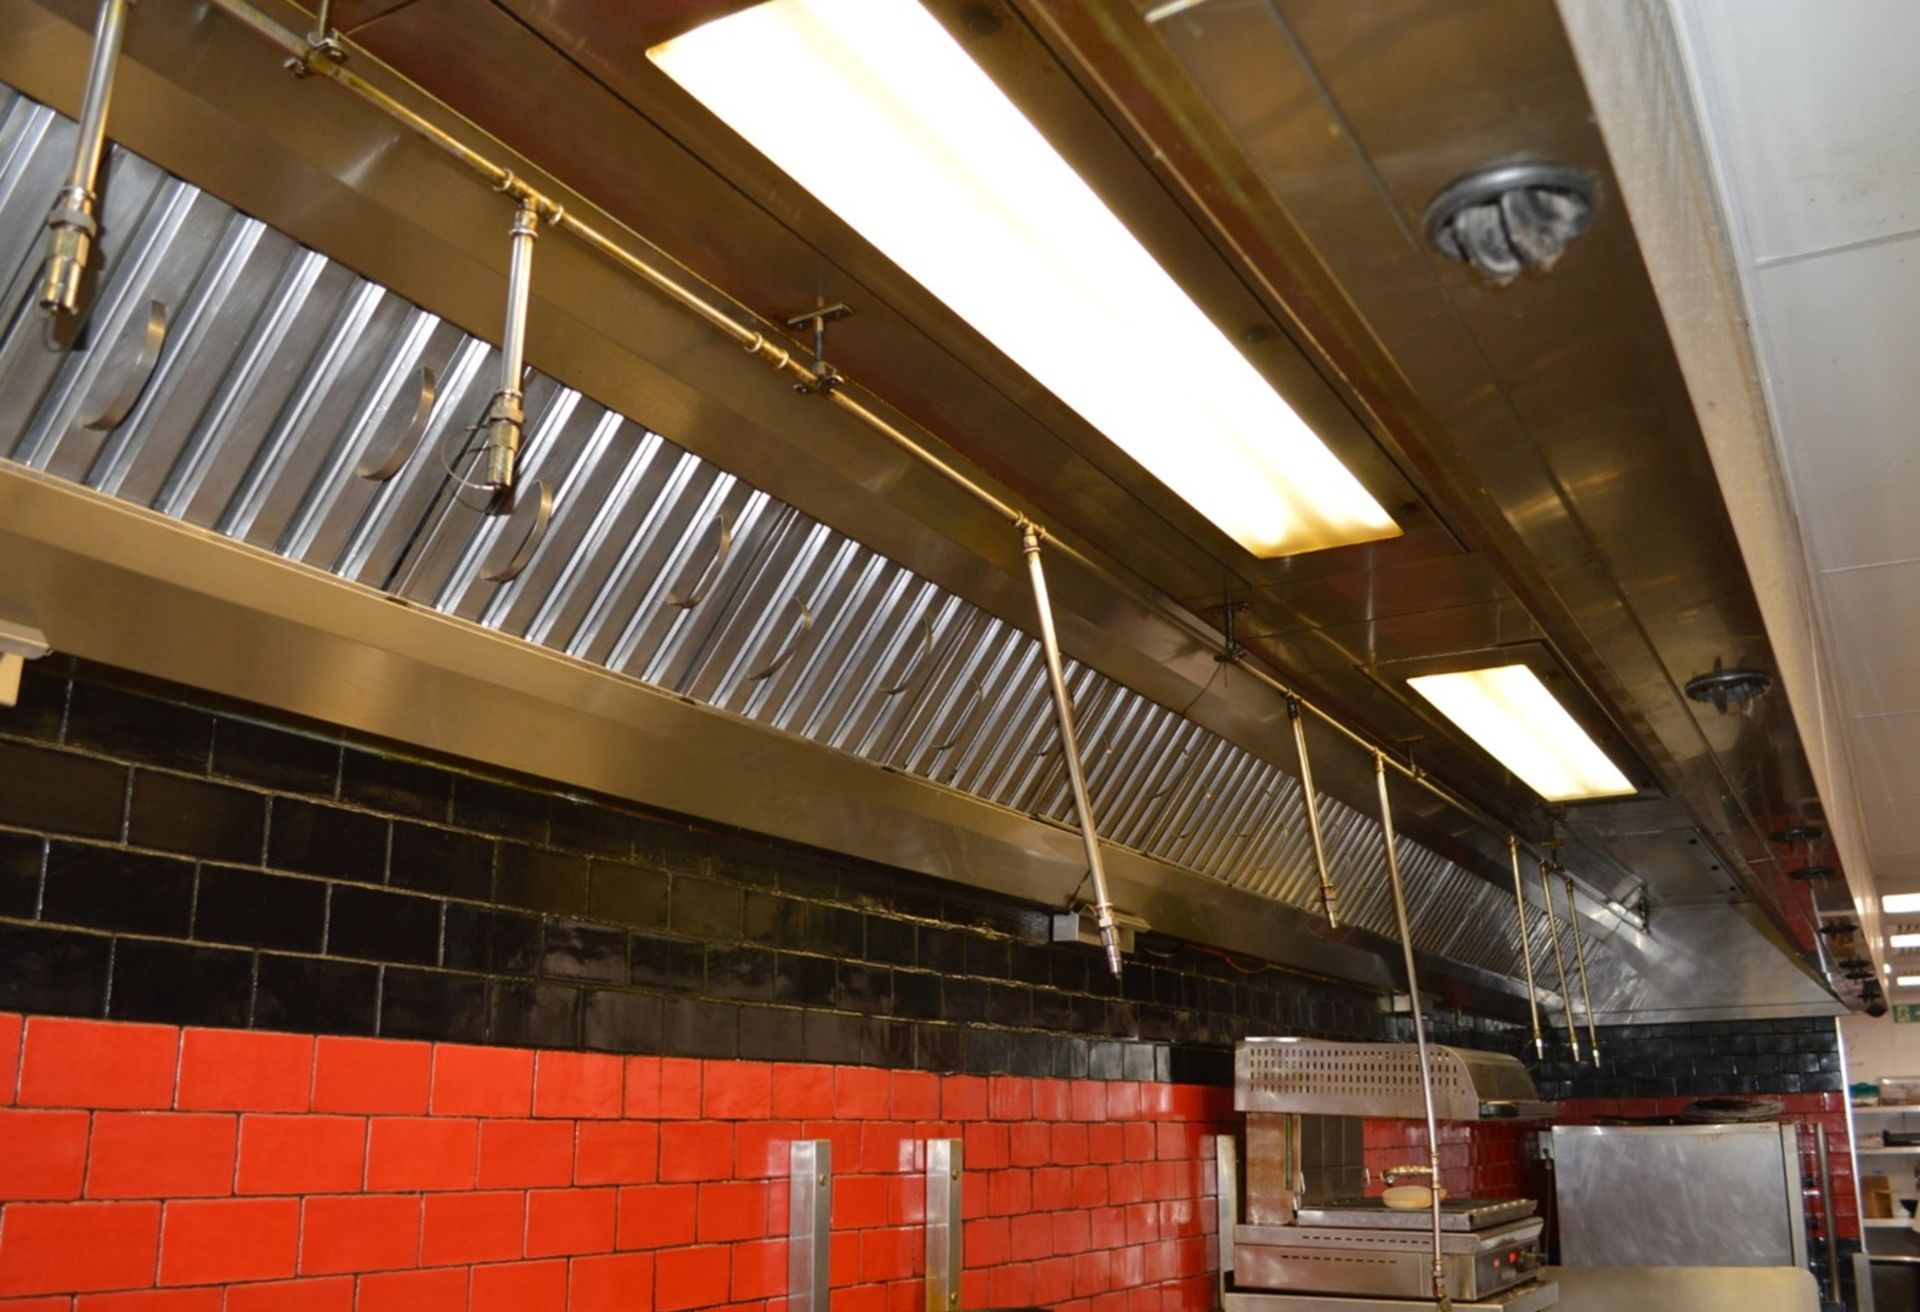 1 x Commercial Stainless Steel Kitchen Extractor Canopy - 30ft Length - H50 x W880 x D140 cms - - Image 6 of 6